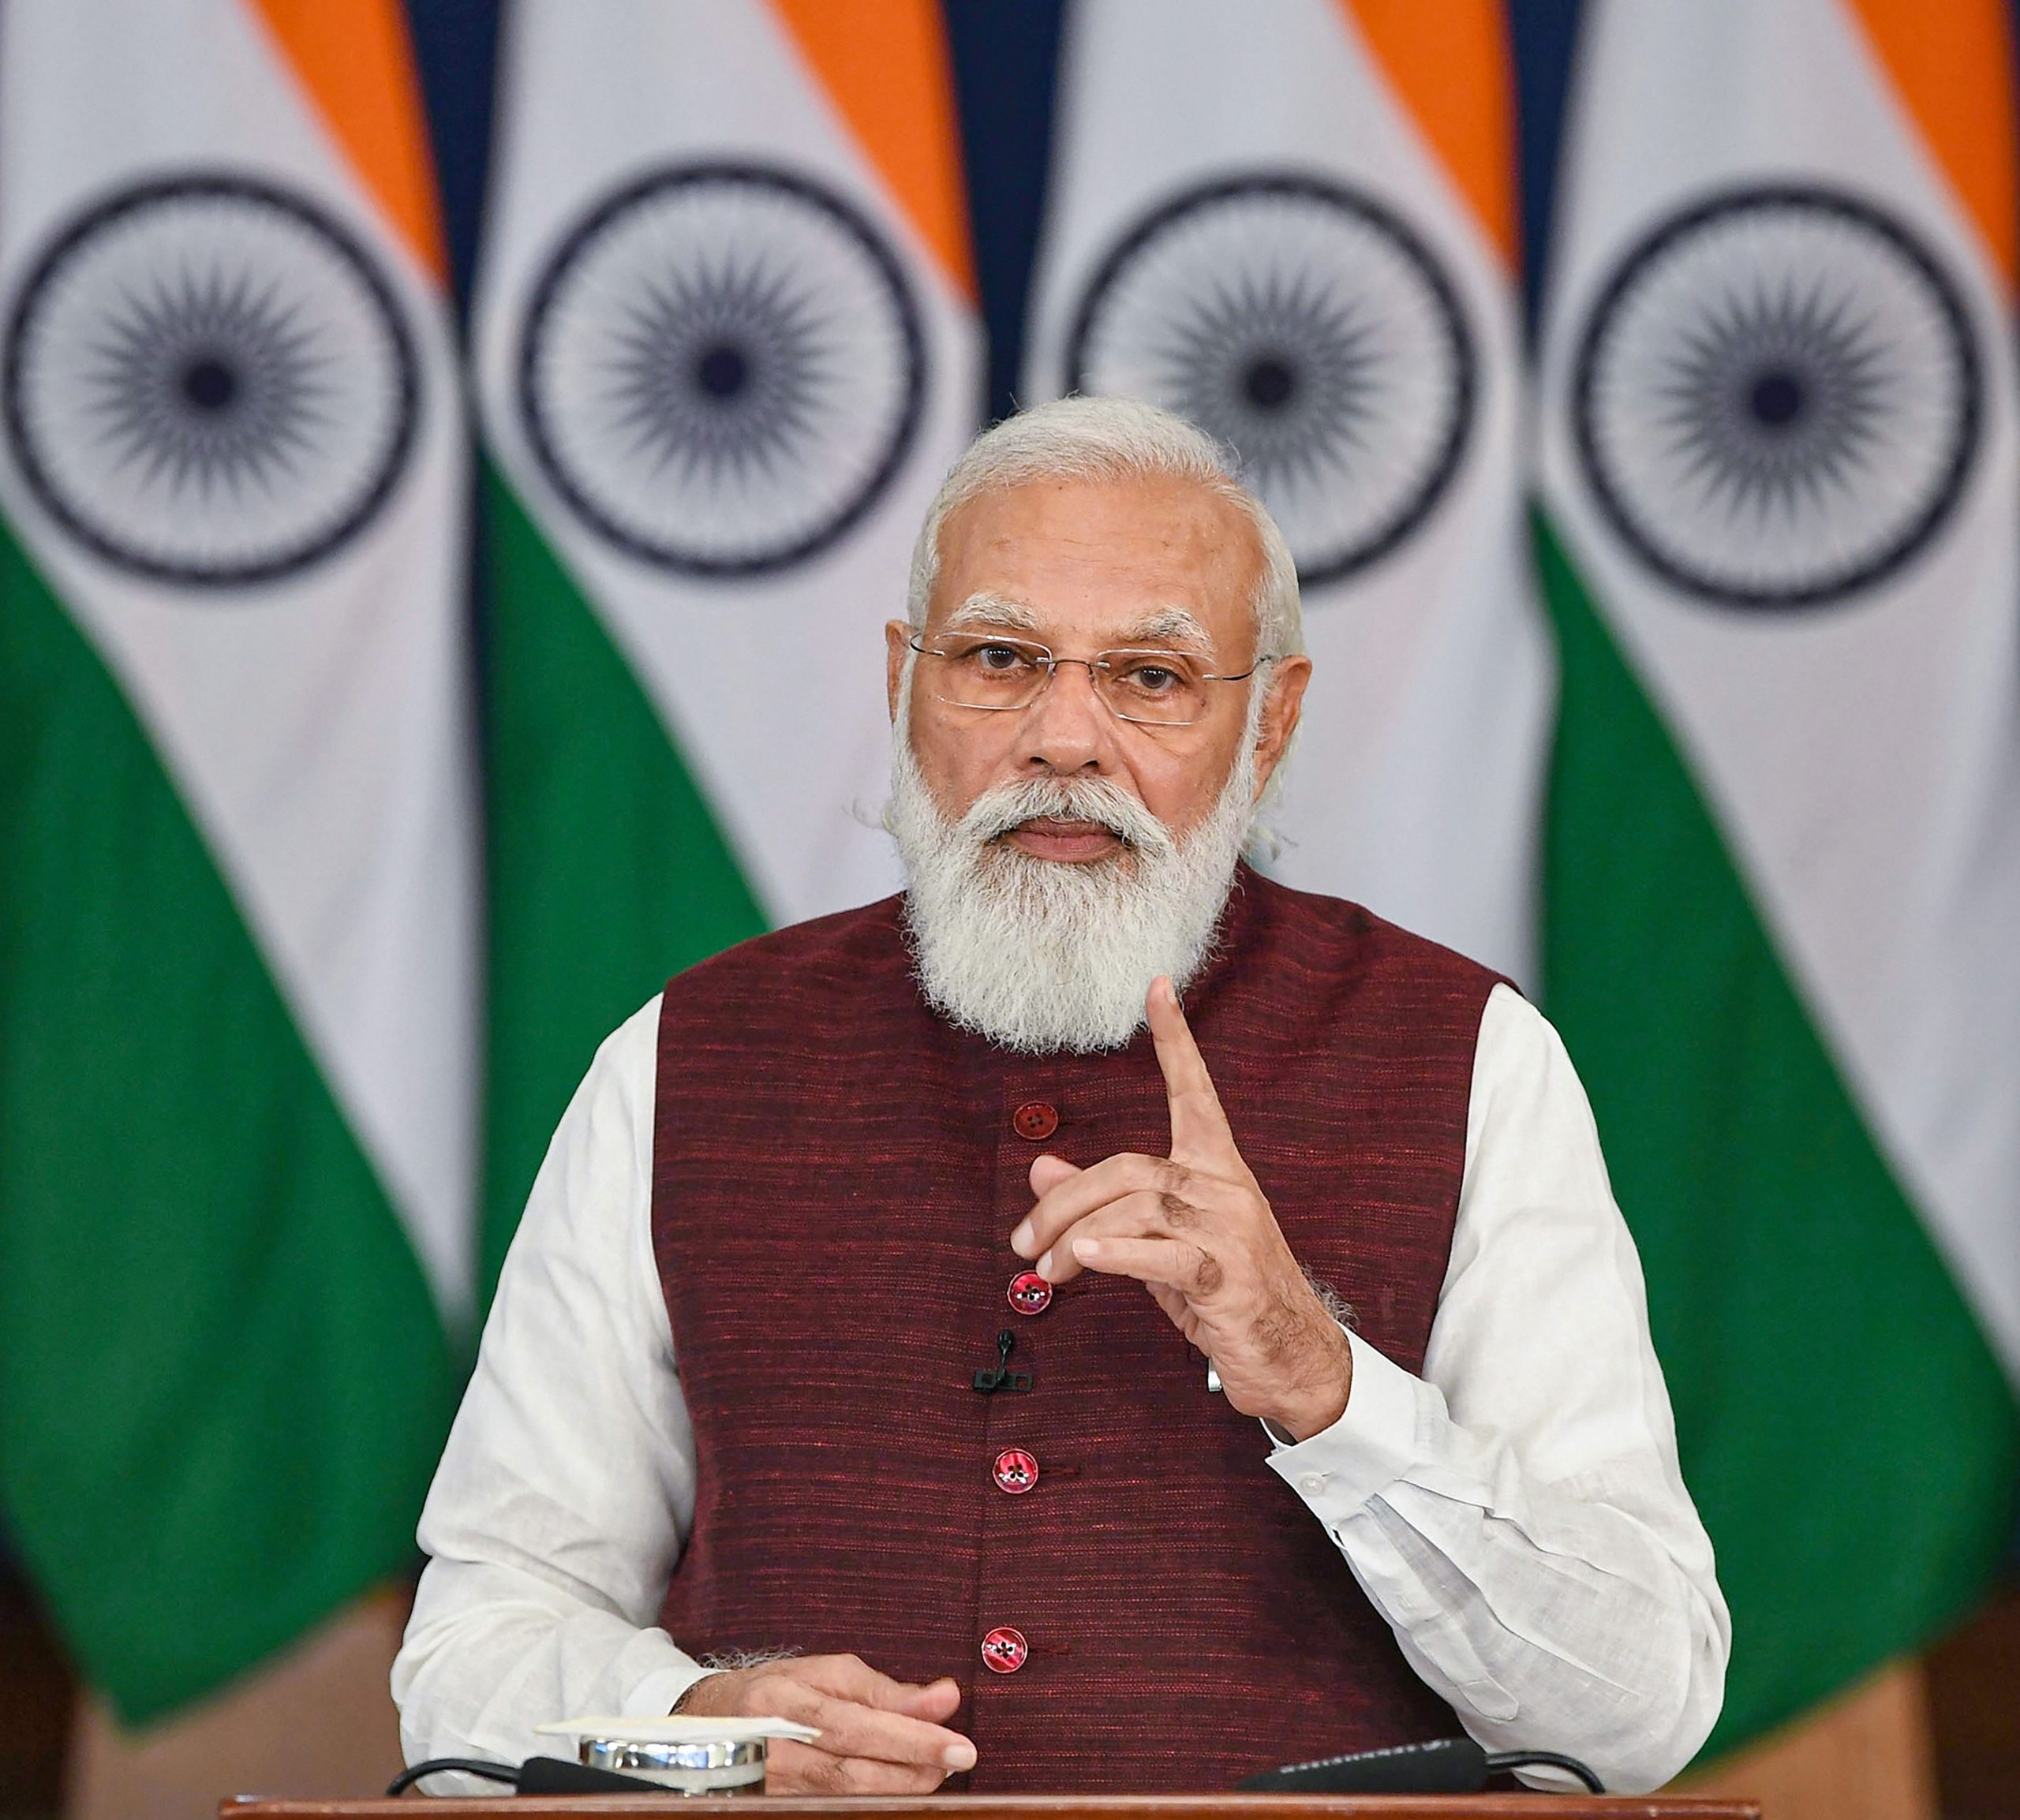 PM Modi to attend first in-person Quad summit, address UN General Assembly